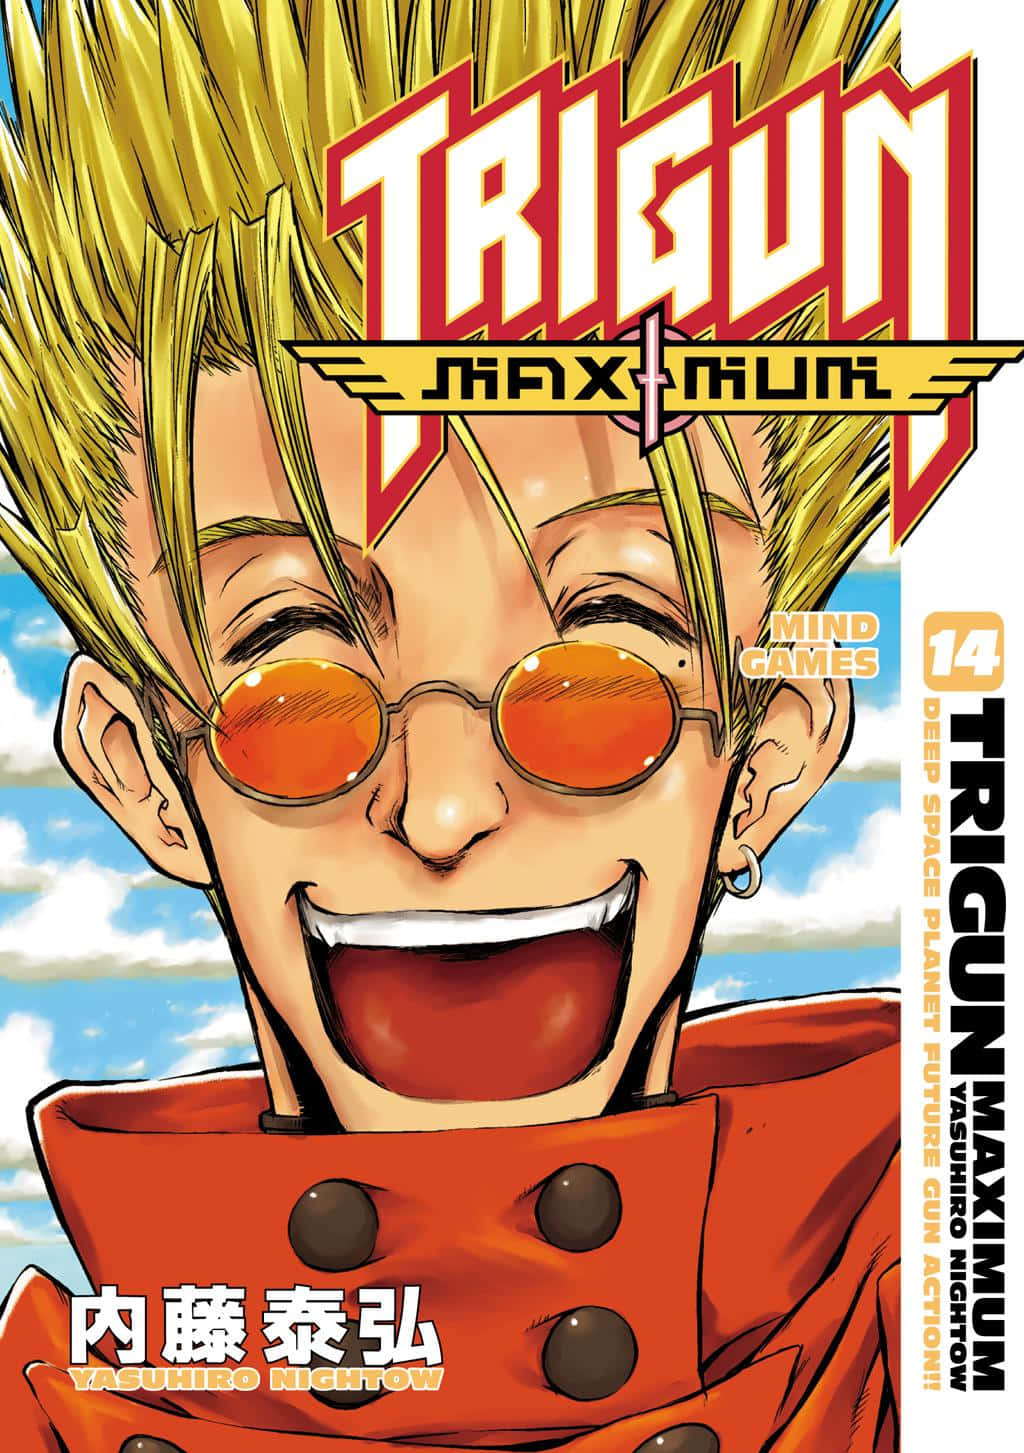 "Experience the Wild West Vibe of Trigun!"